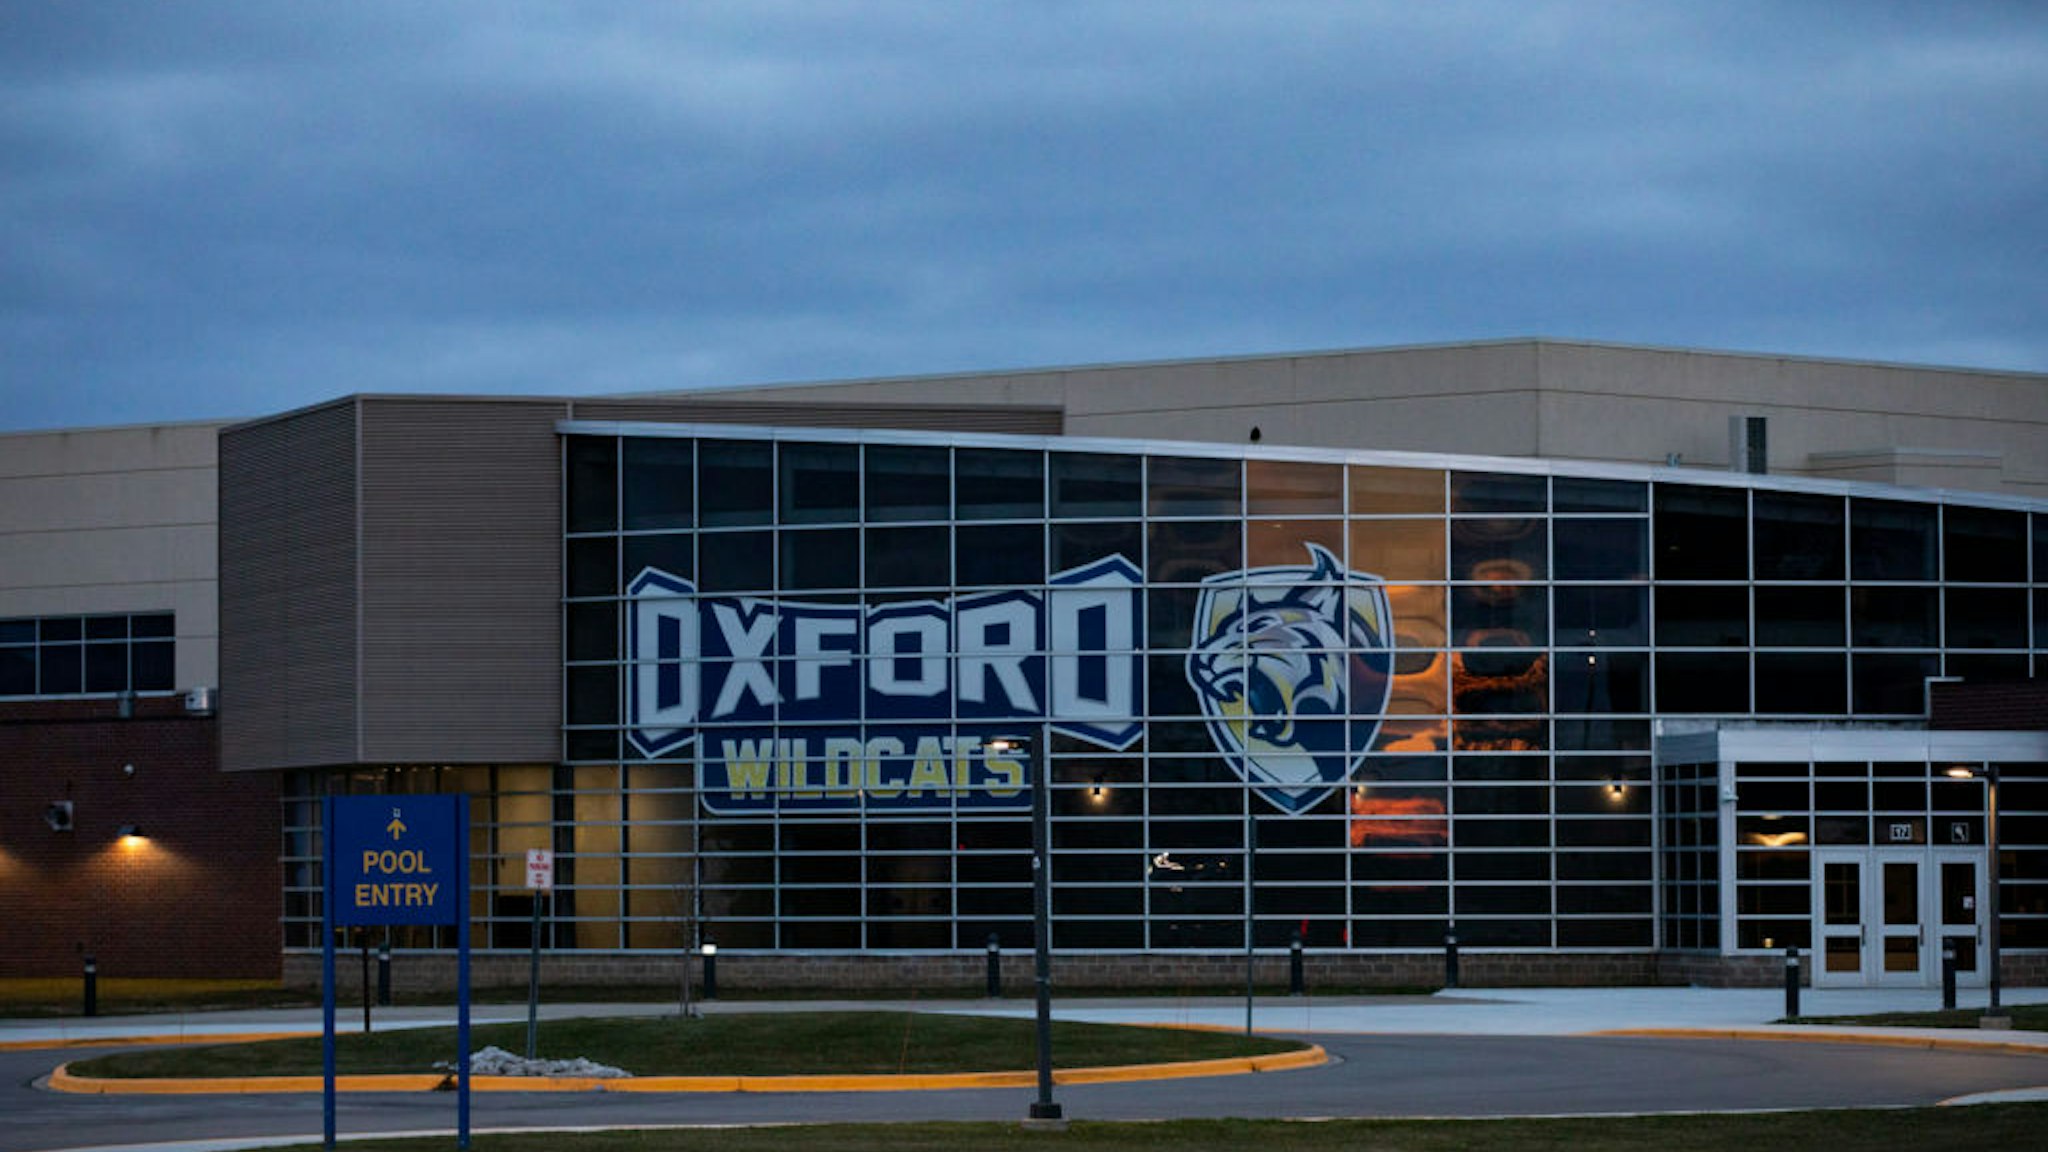 An exterior view of Oxford High School on December 7, 2021 in Oxford, Michigan